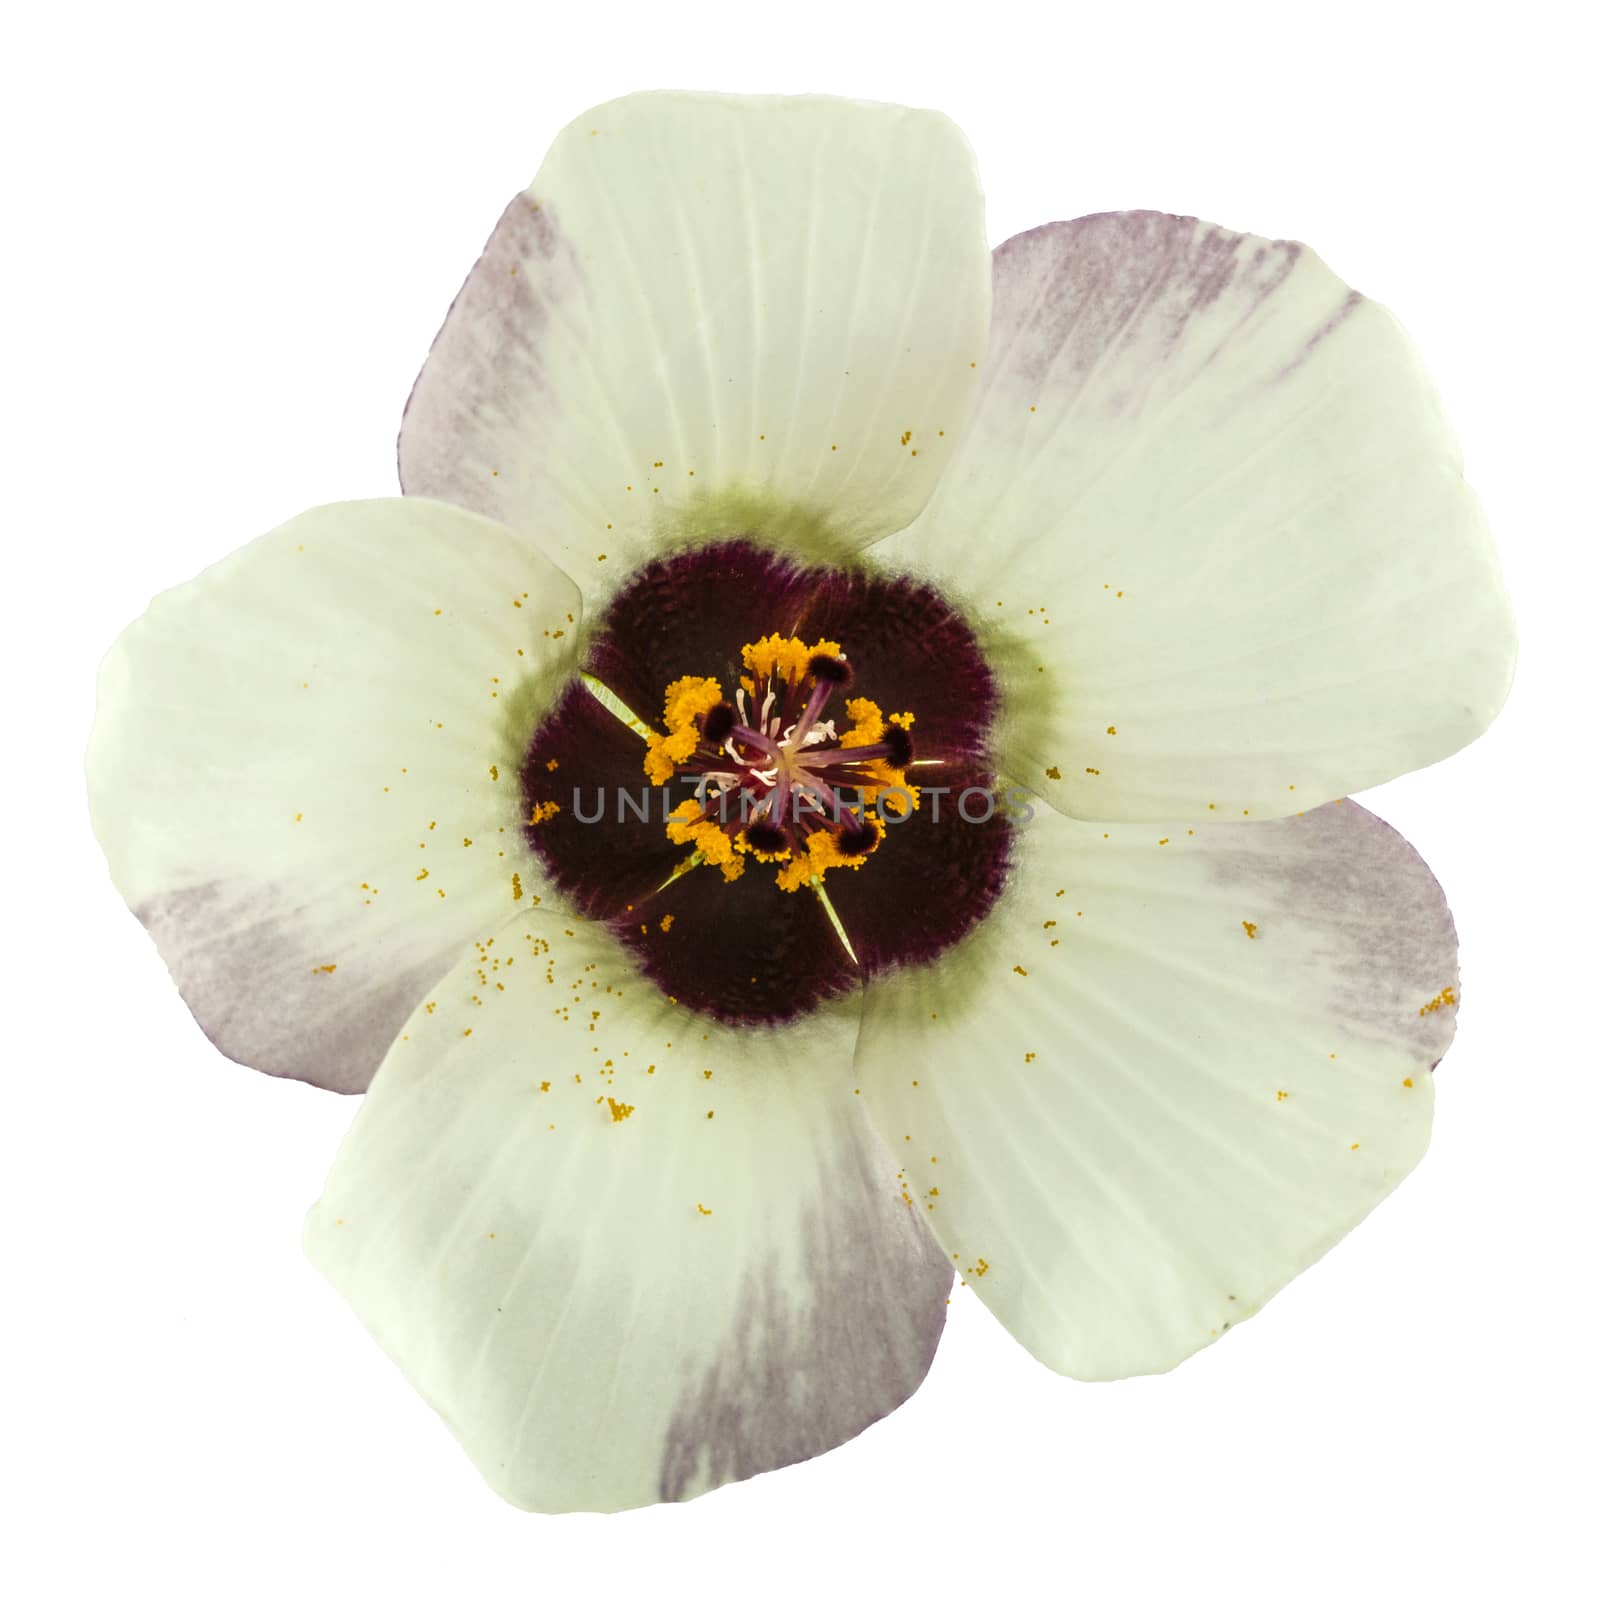 Flower of Hibiscus, isolated on white background